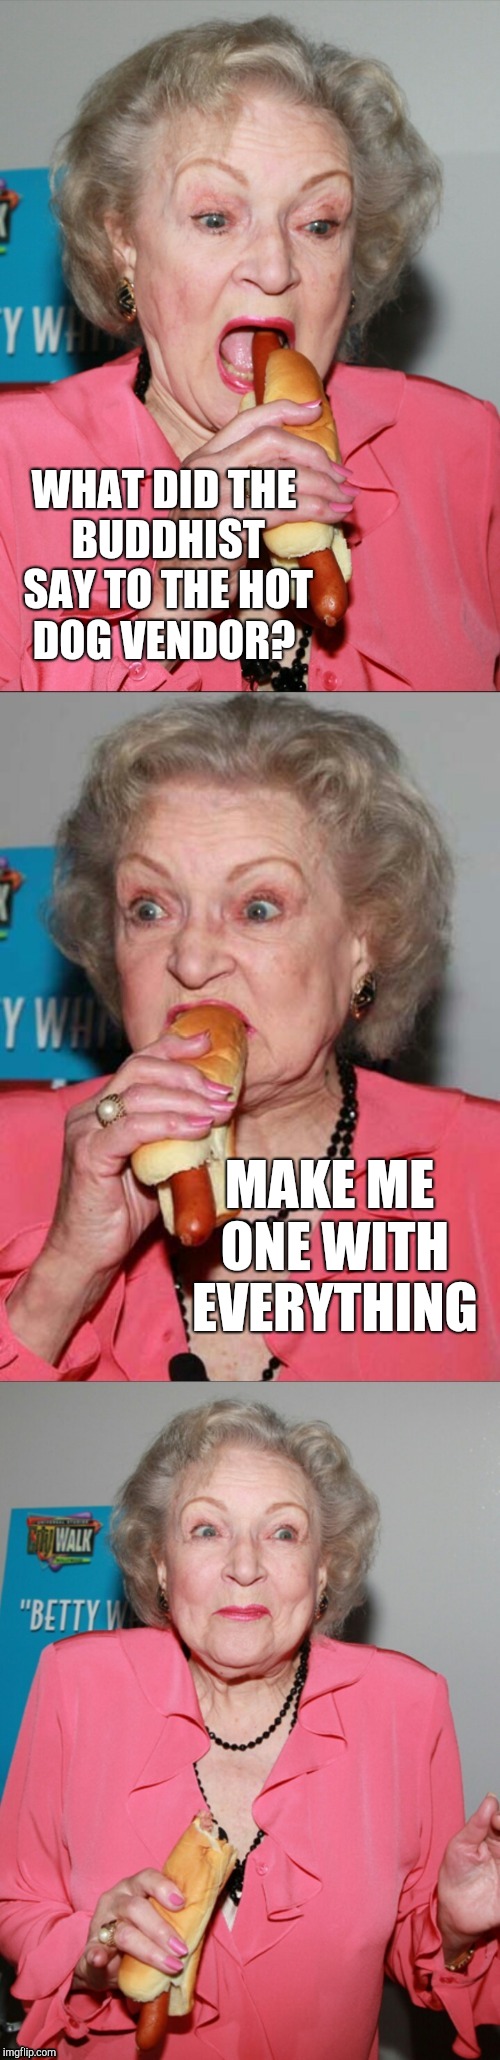 Betty White joke template  | WHAT DID THE BUDDHIST SAY TO THE HOT DOG VENDOR? MAKE ME ONE WITH EVERYTHING | image tagged in betty white joke template,betty white,hot dogs,buddhism,jbmemegeek | made w/ Imgflip meme maker